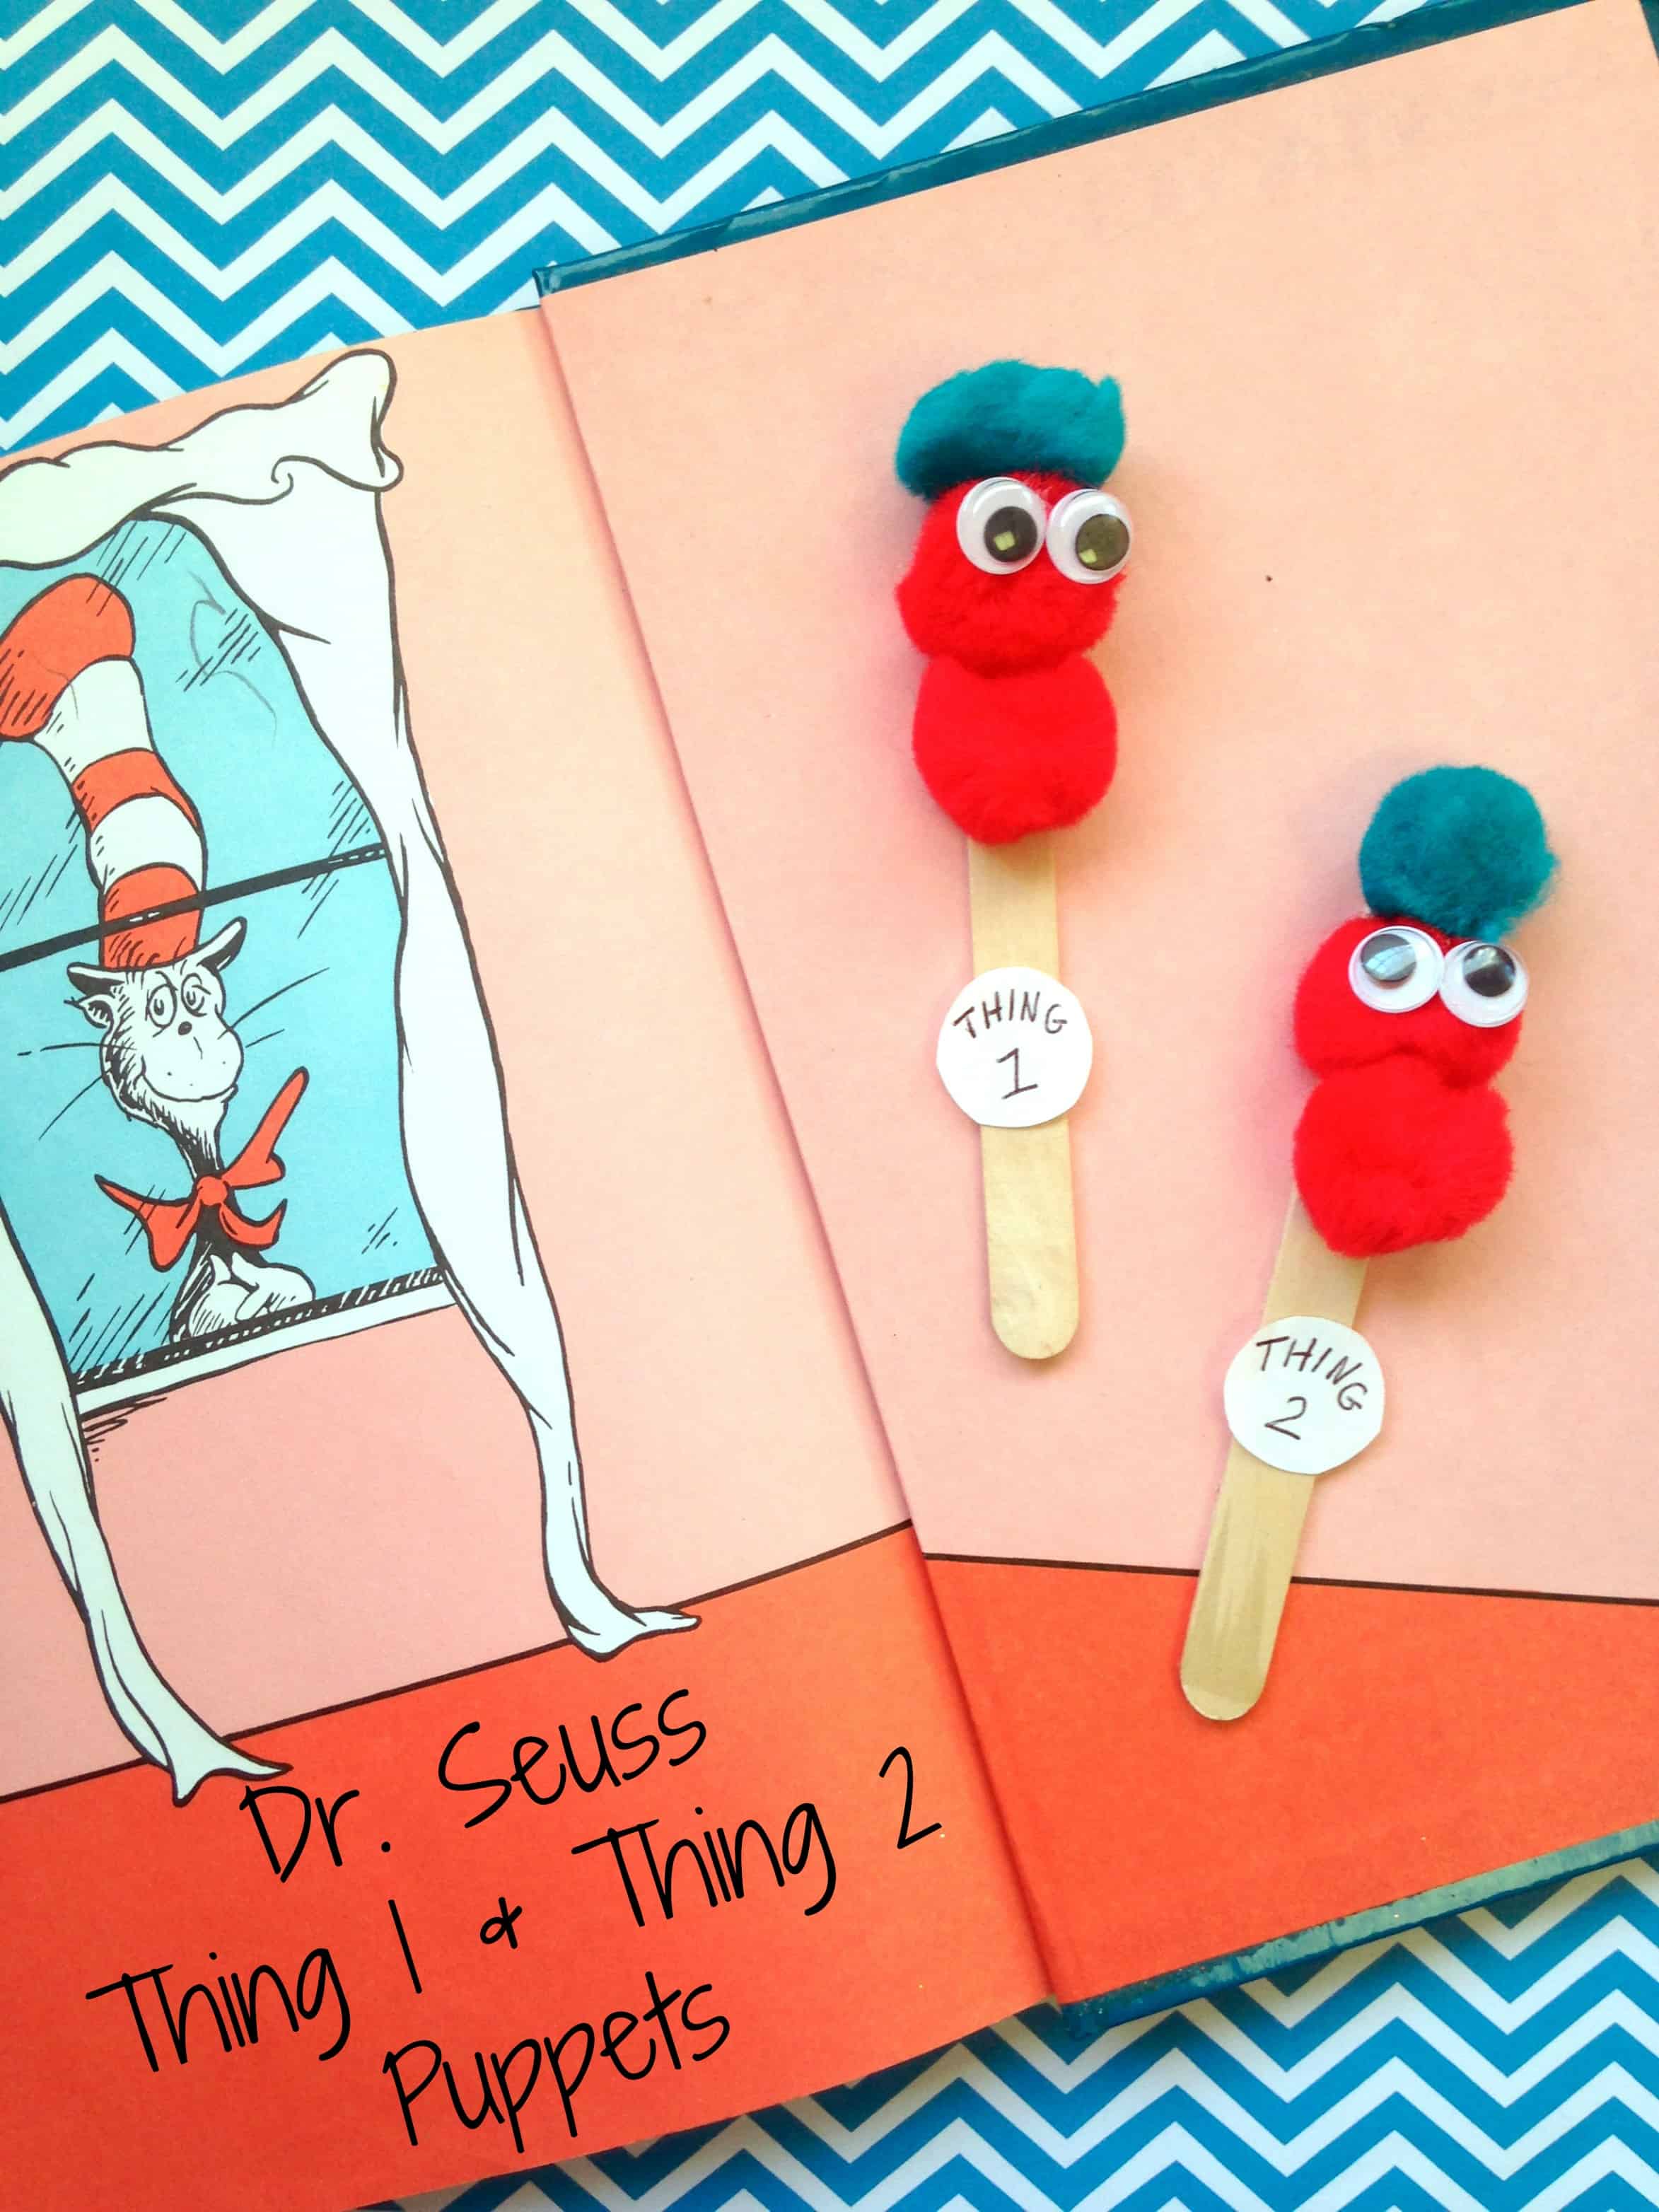 dr seuss thing 1 thing 2 puppets